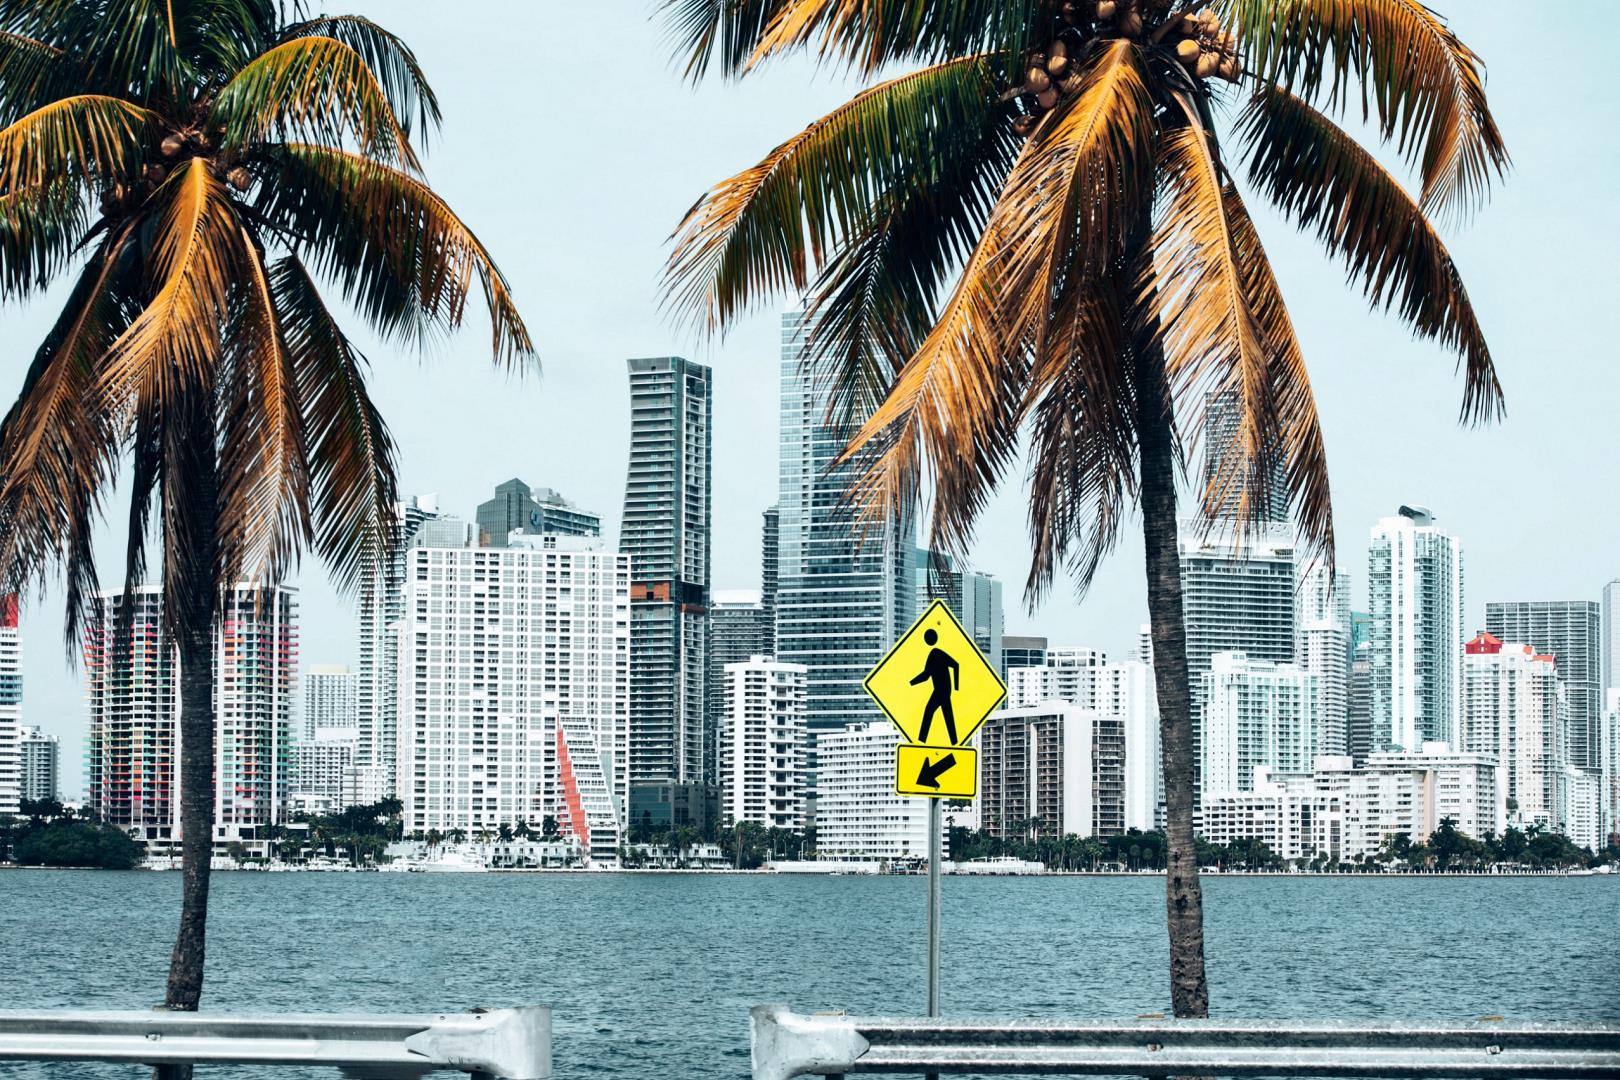 Miami palm trees with cityscape - Photo Credit: One Shot via Pexels